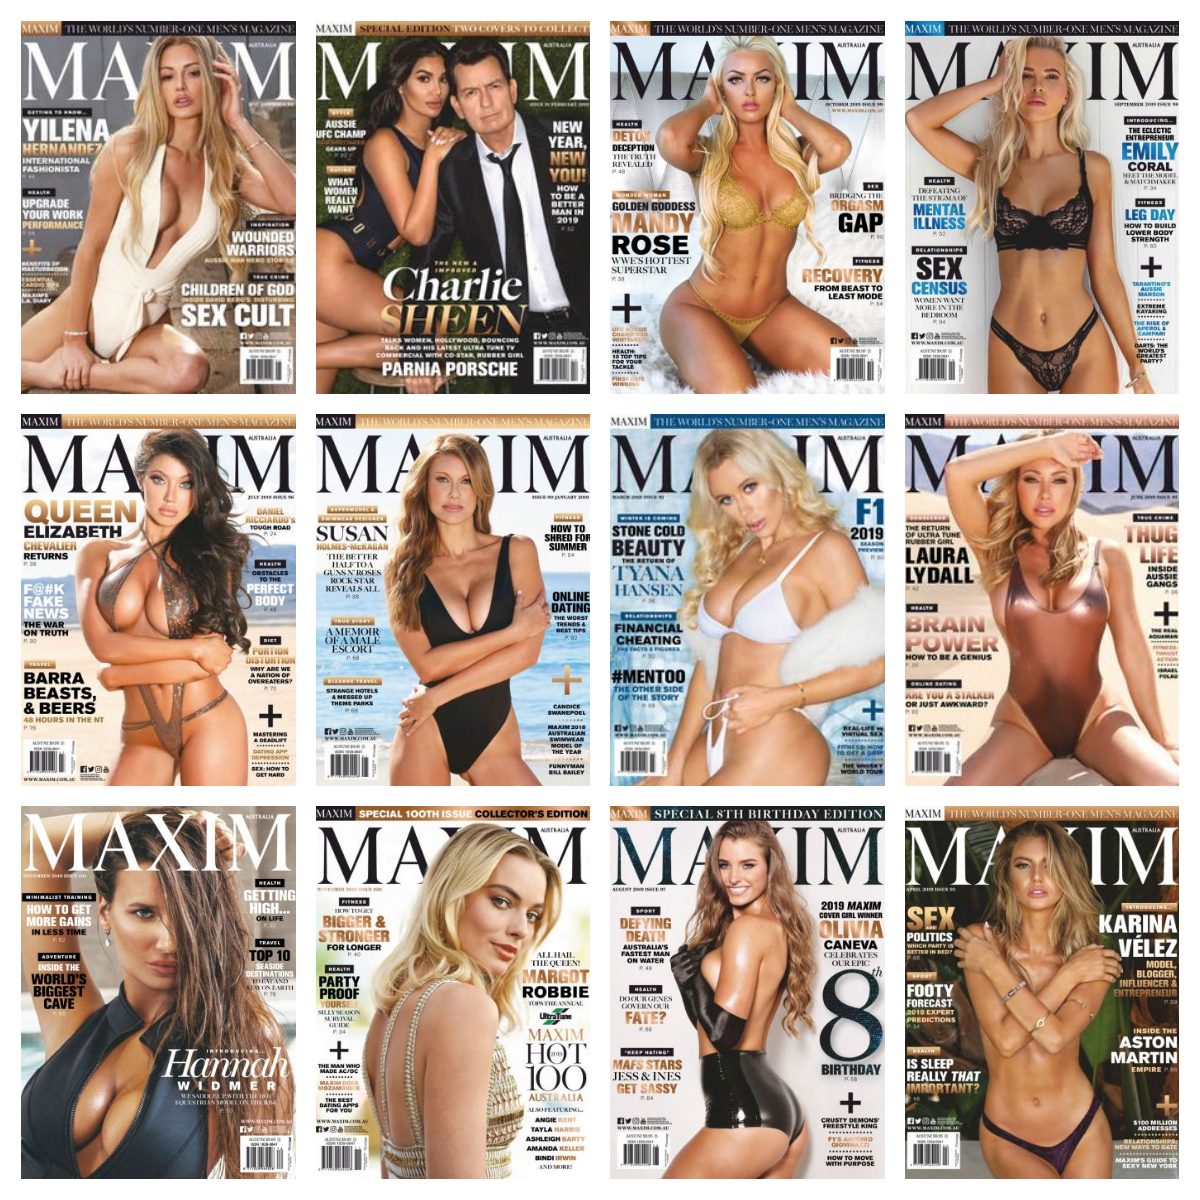 Maxim Australia - 2019 Full Year Issues Collection